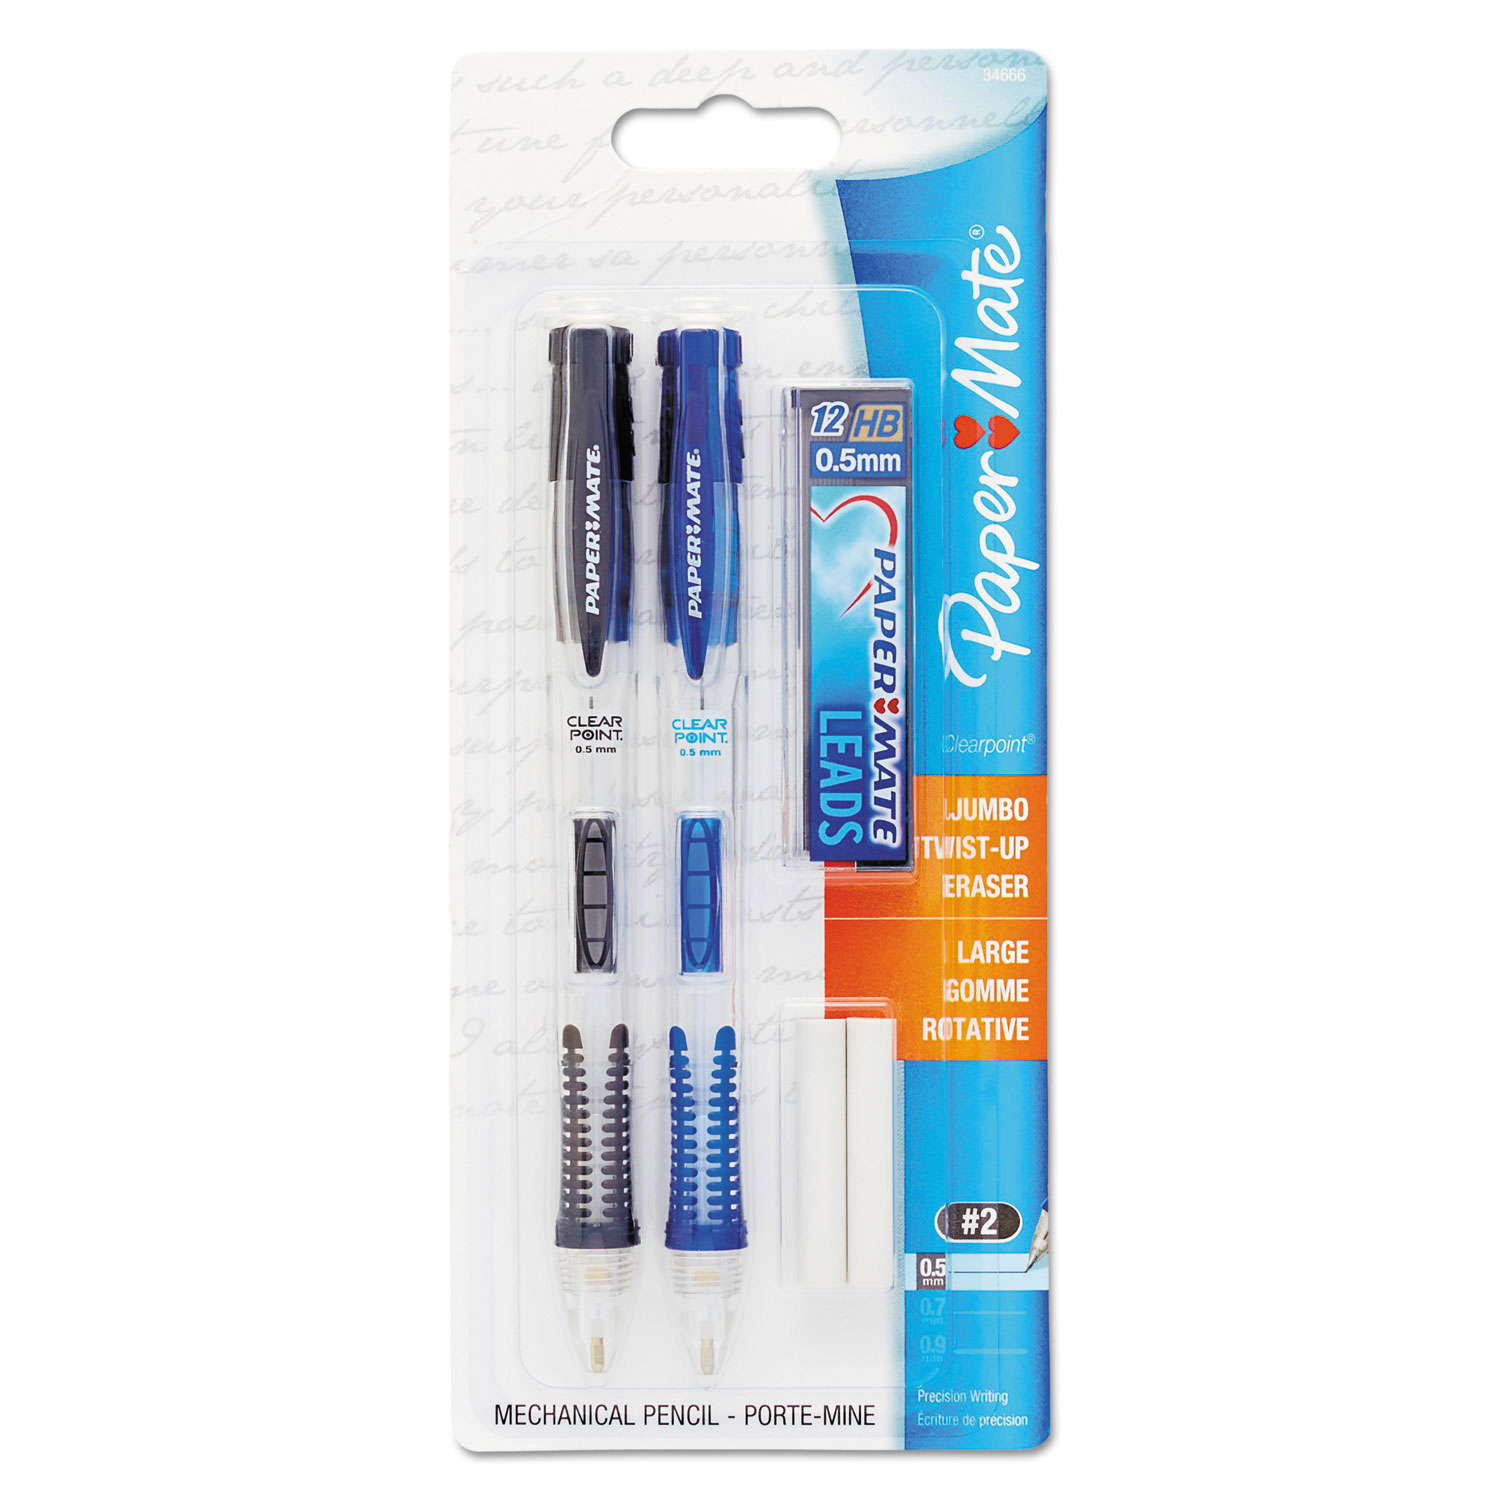 PAPER MATE HB 0.5 MECHANICAL PEN/PENCIL LEAD REFILLS PACK OF 12 LEADS PAPERMATE